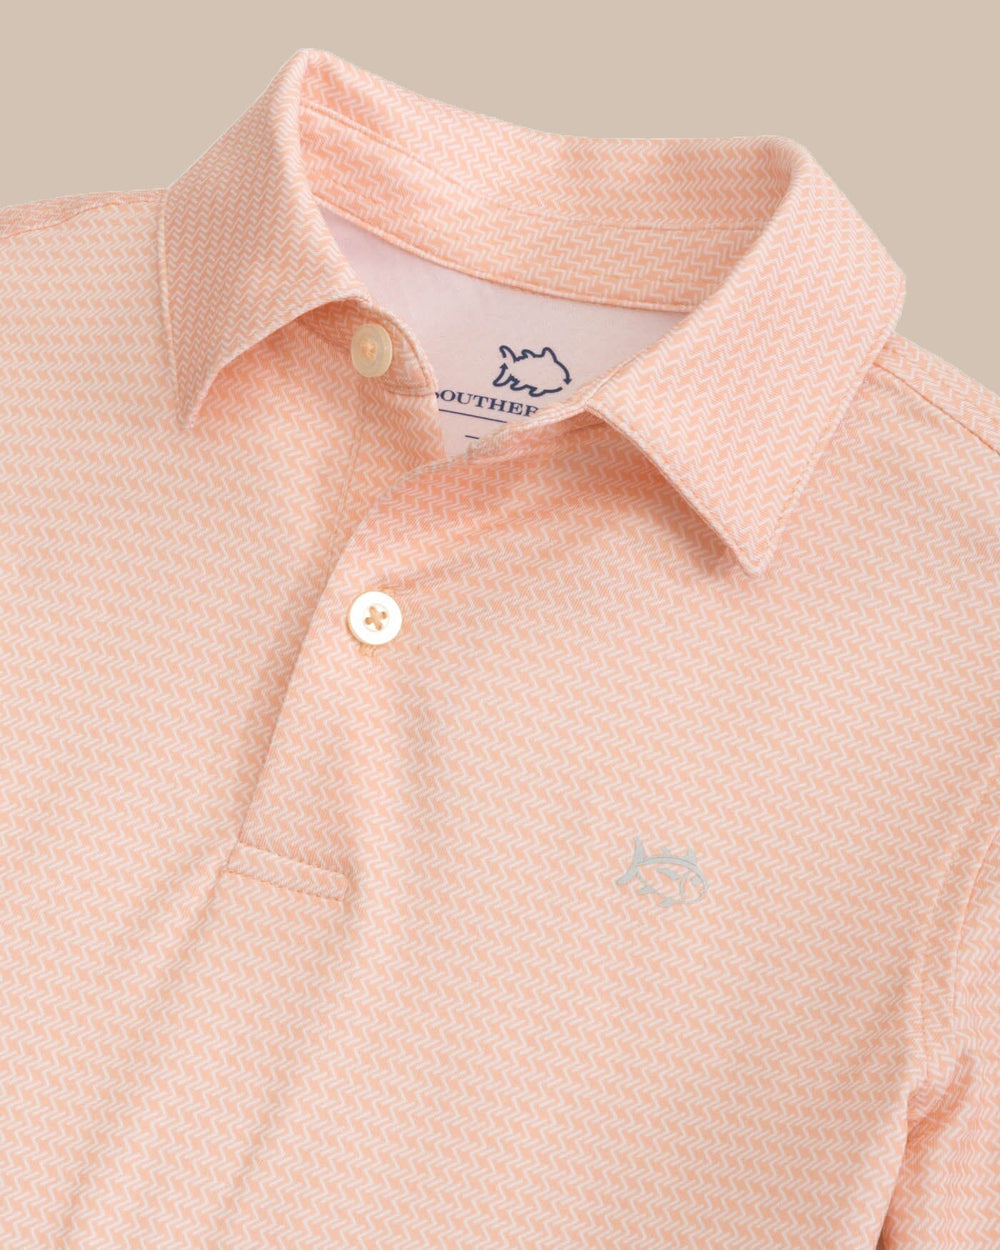 The detail view of the Southern Tide Kids Driver Getting Ziggy With It Printed Polo by Southern Tide - Apricot Blush Coral